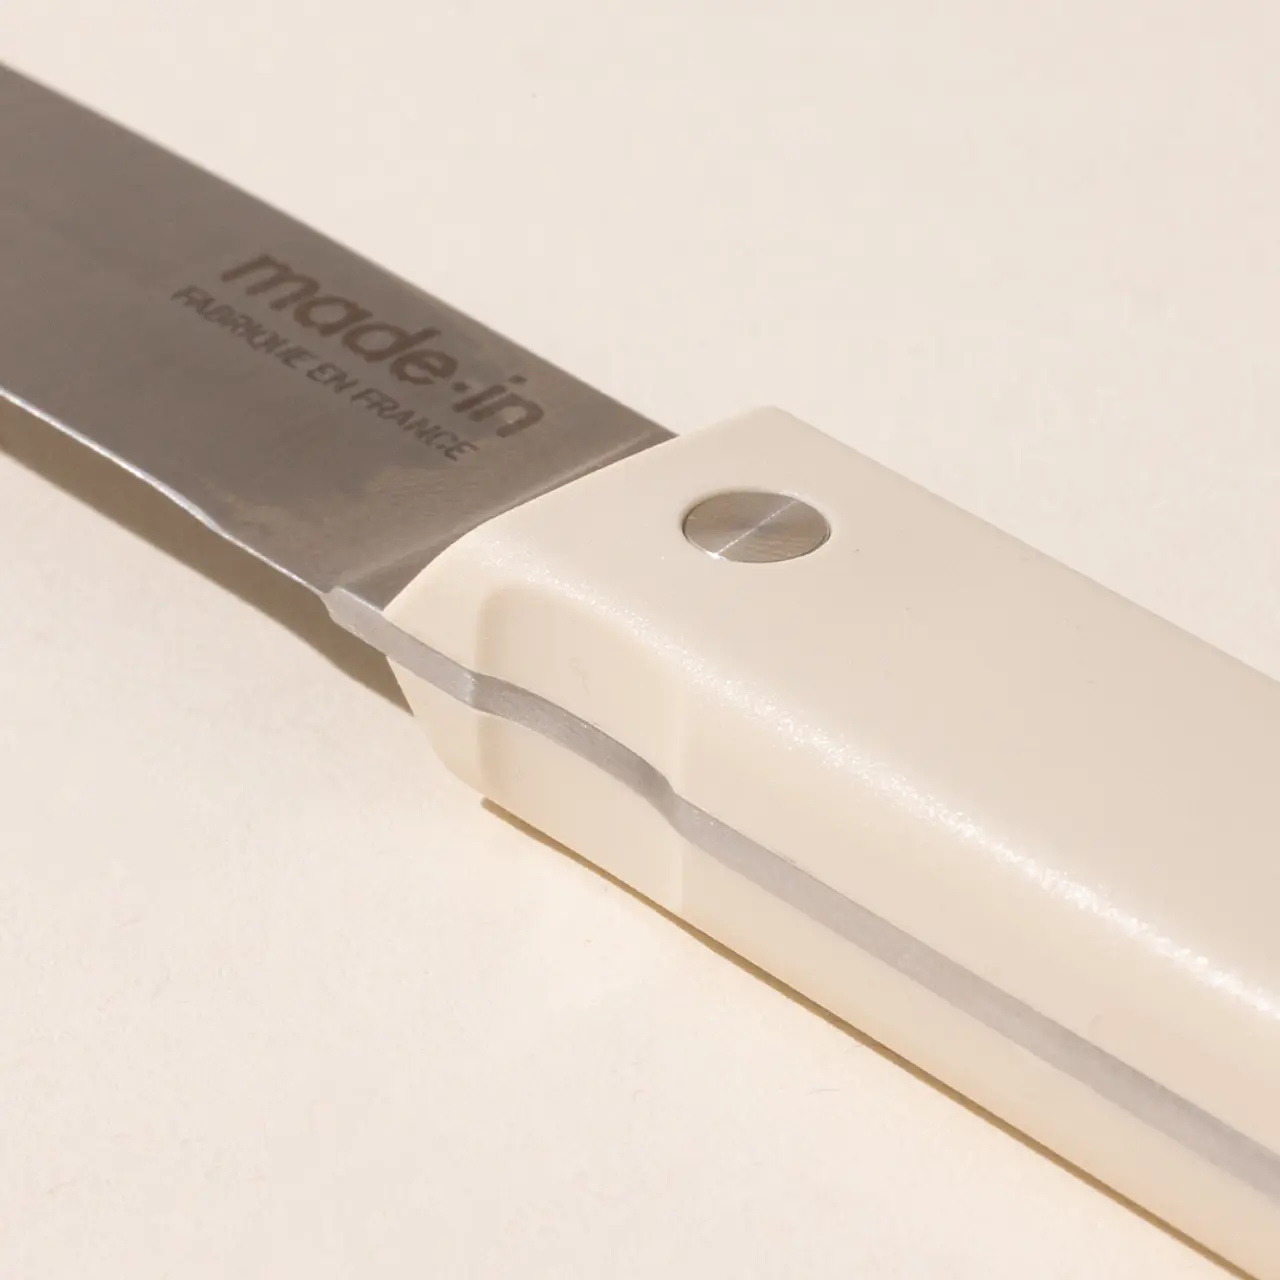 Close-up of a kitchen knife with a stainless steel blade and a white handle, marked with the text "made in" and branding or model information.